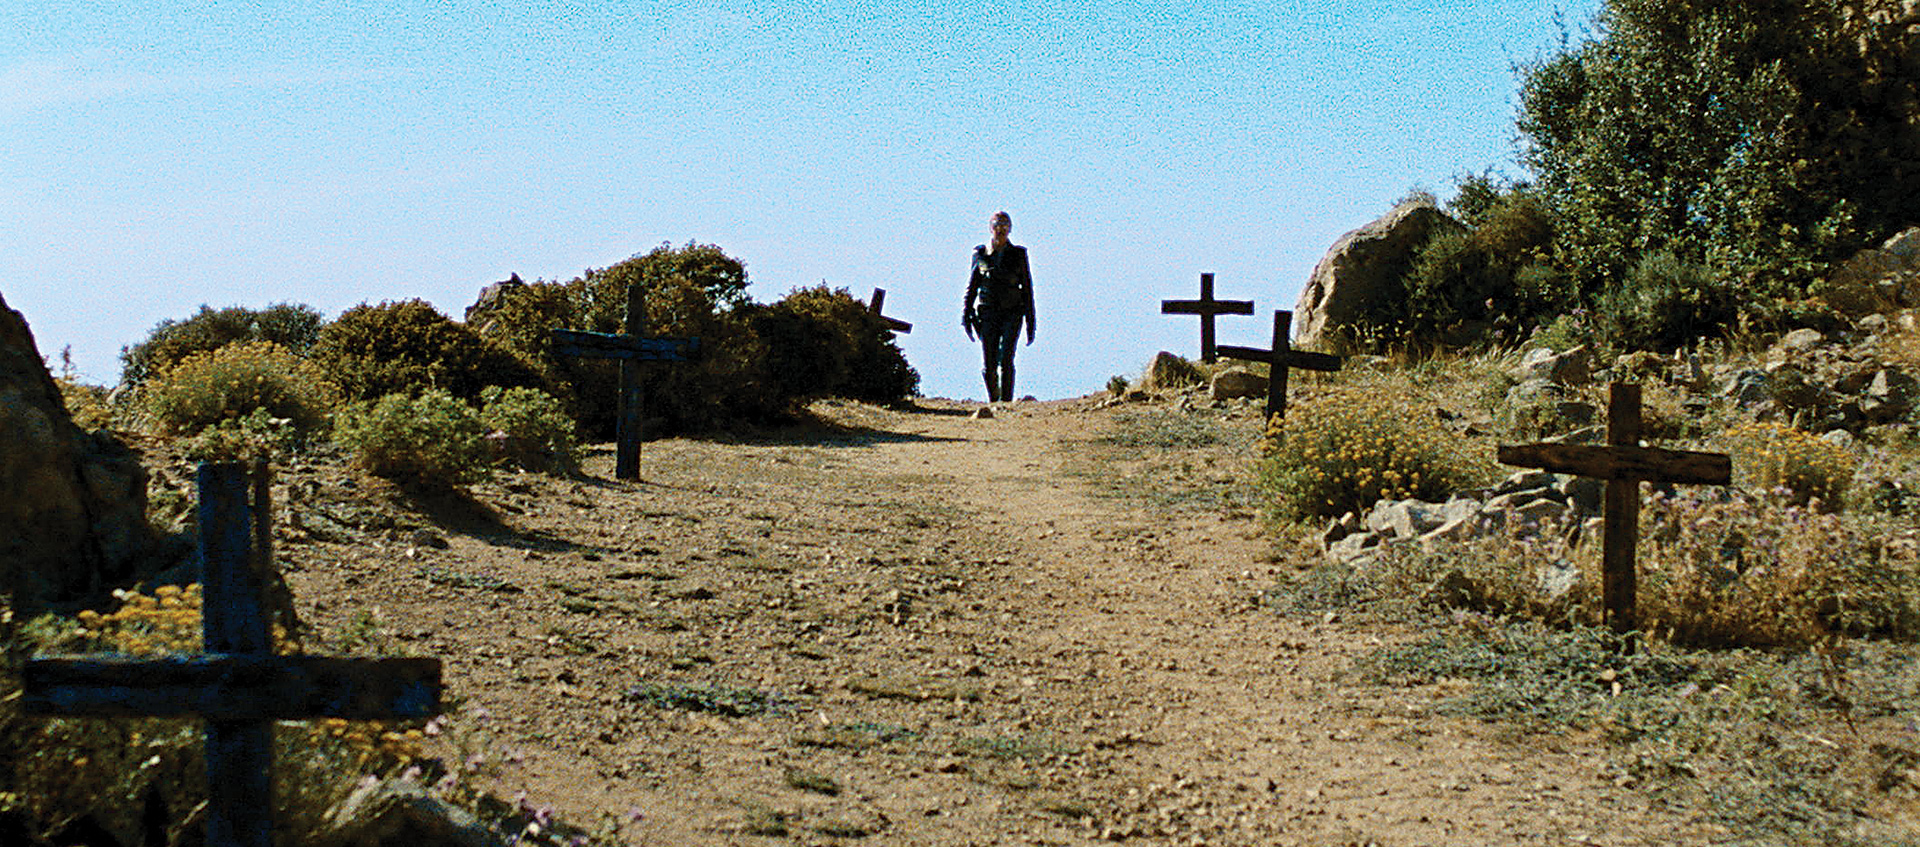 Man walking through path lined with crosses